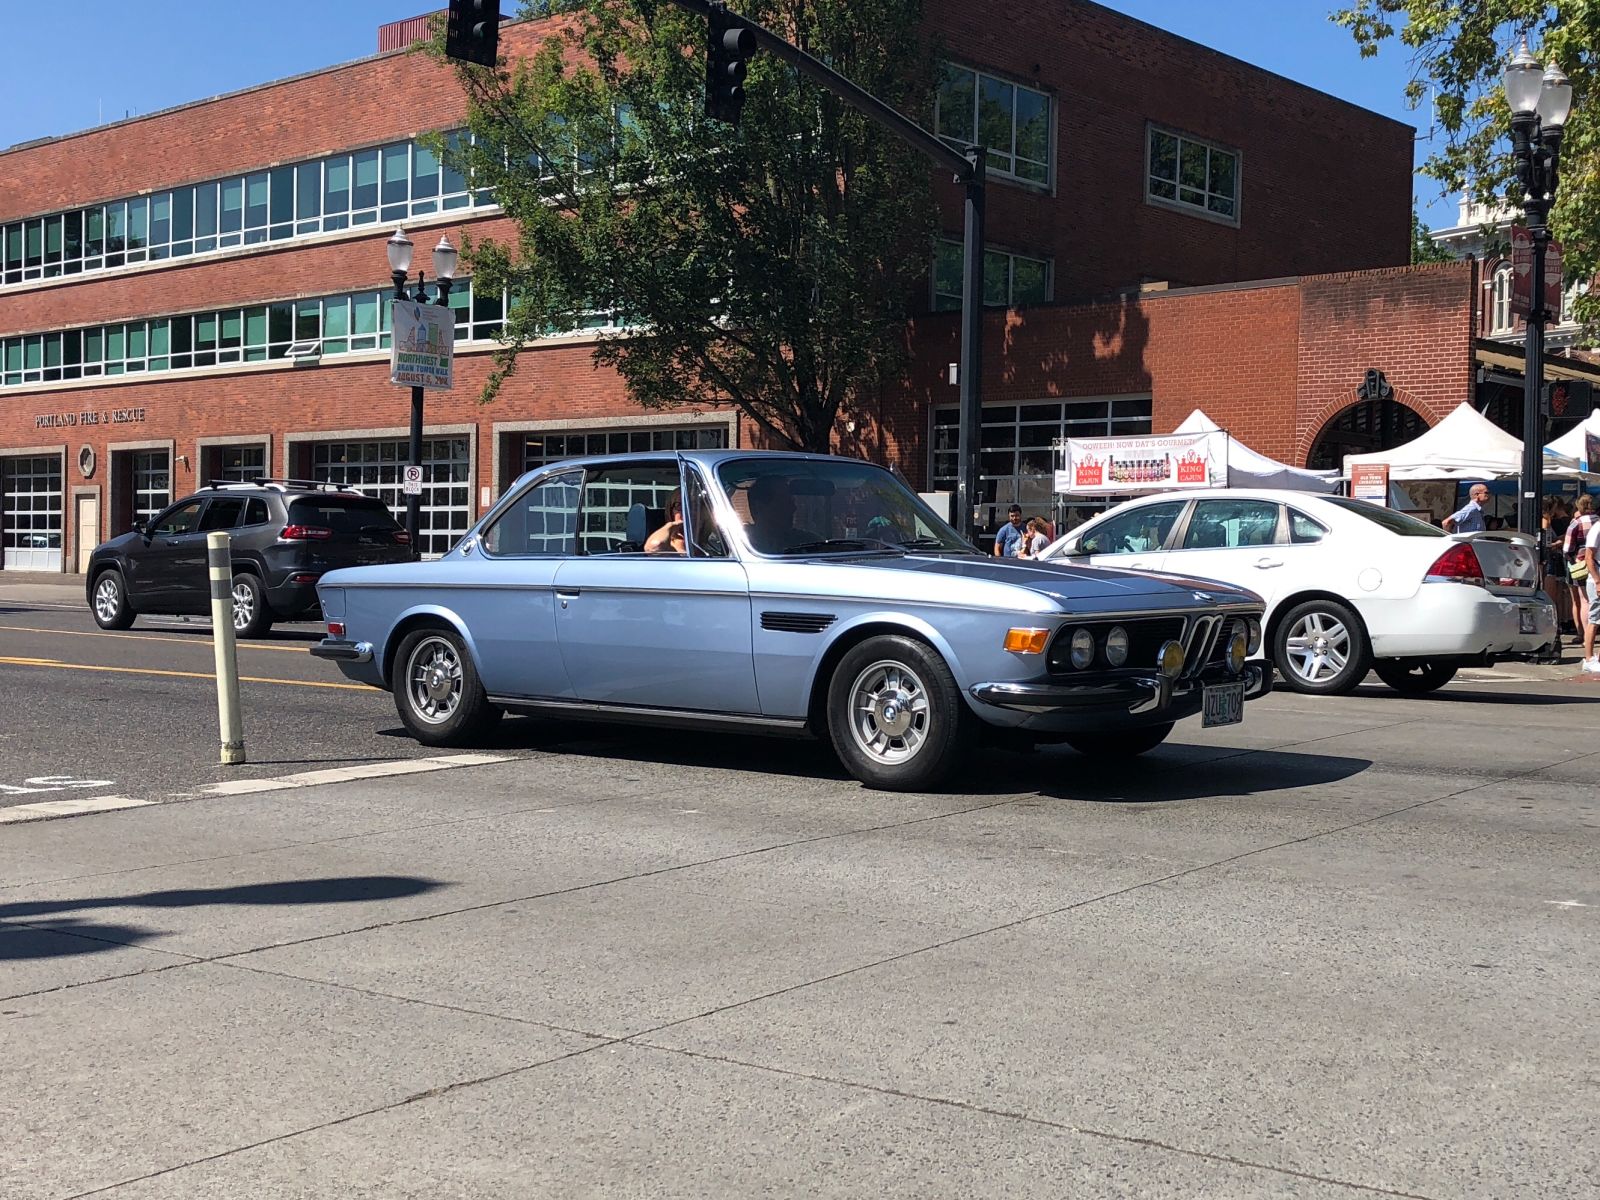 This beautiful BMW 3.0 CSi, which I already posted, great to see. I actually saw a second one in white with gold honeycomb wheels.